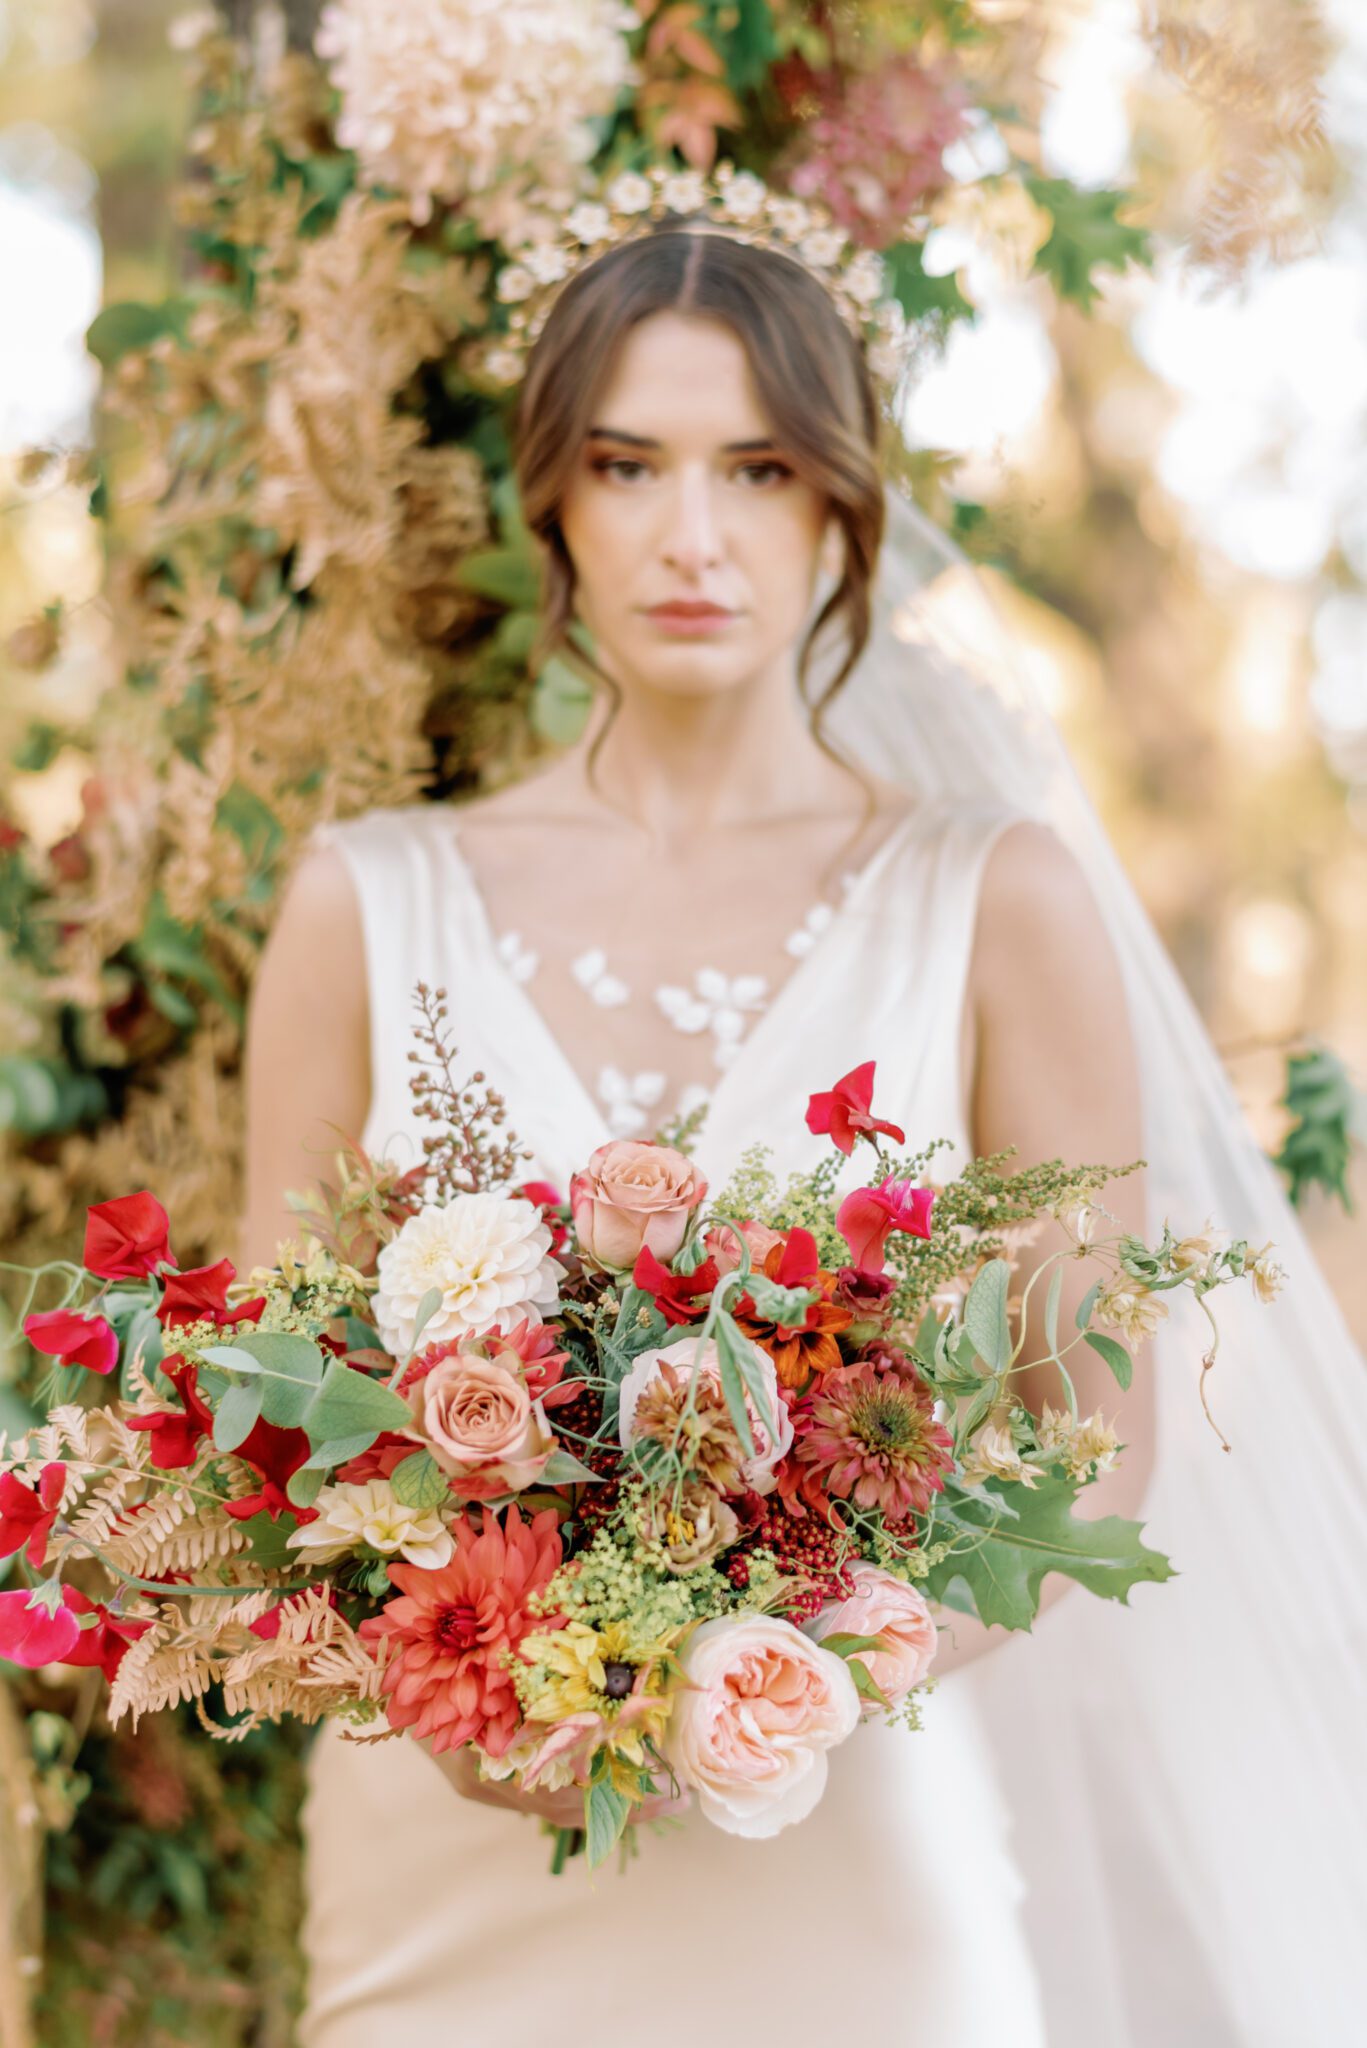 Bride wearing elegant champagne-toned satin wedding gown by Samantha Victoria, holding organic fall floral arrangements by Petal and Stem.